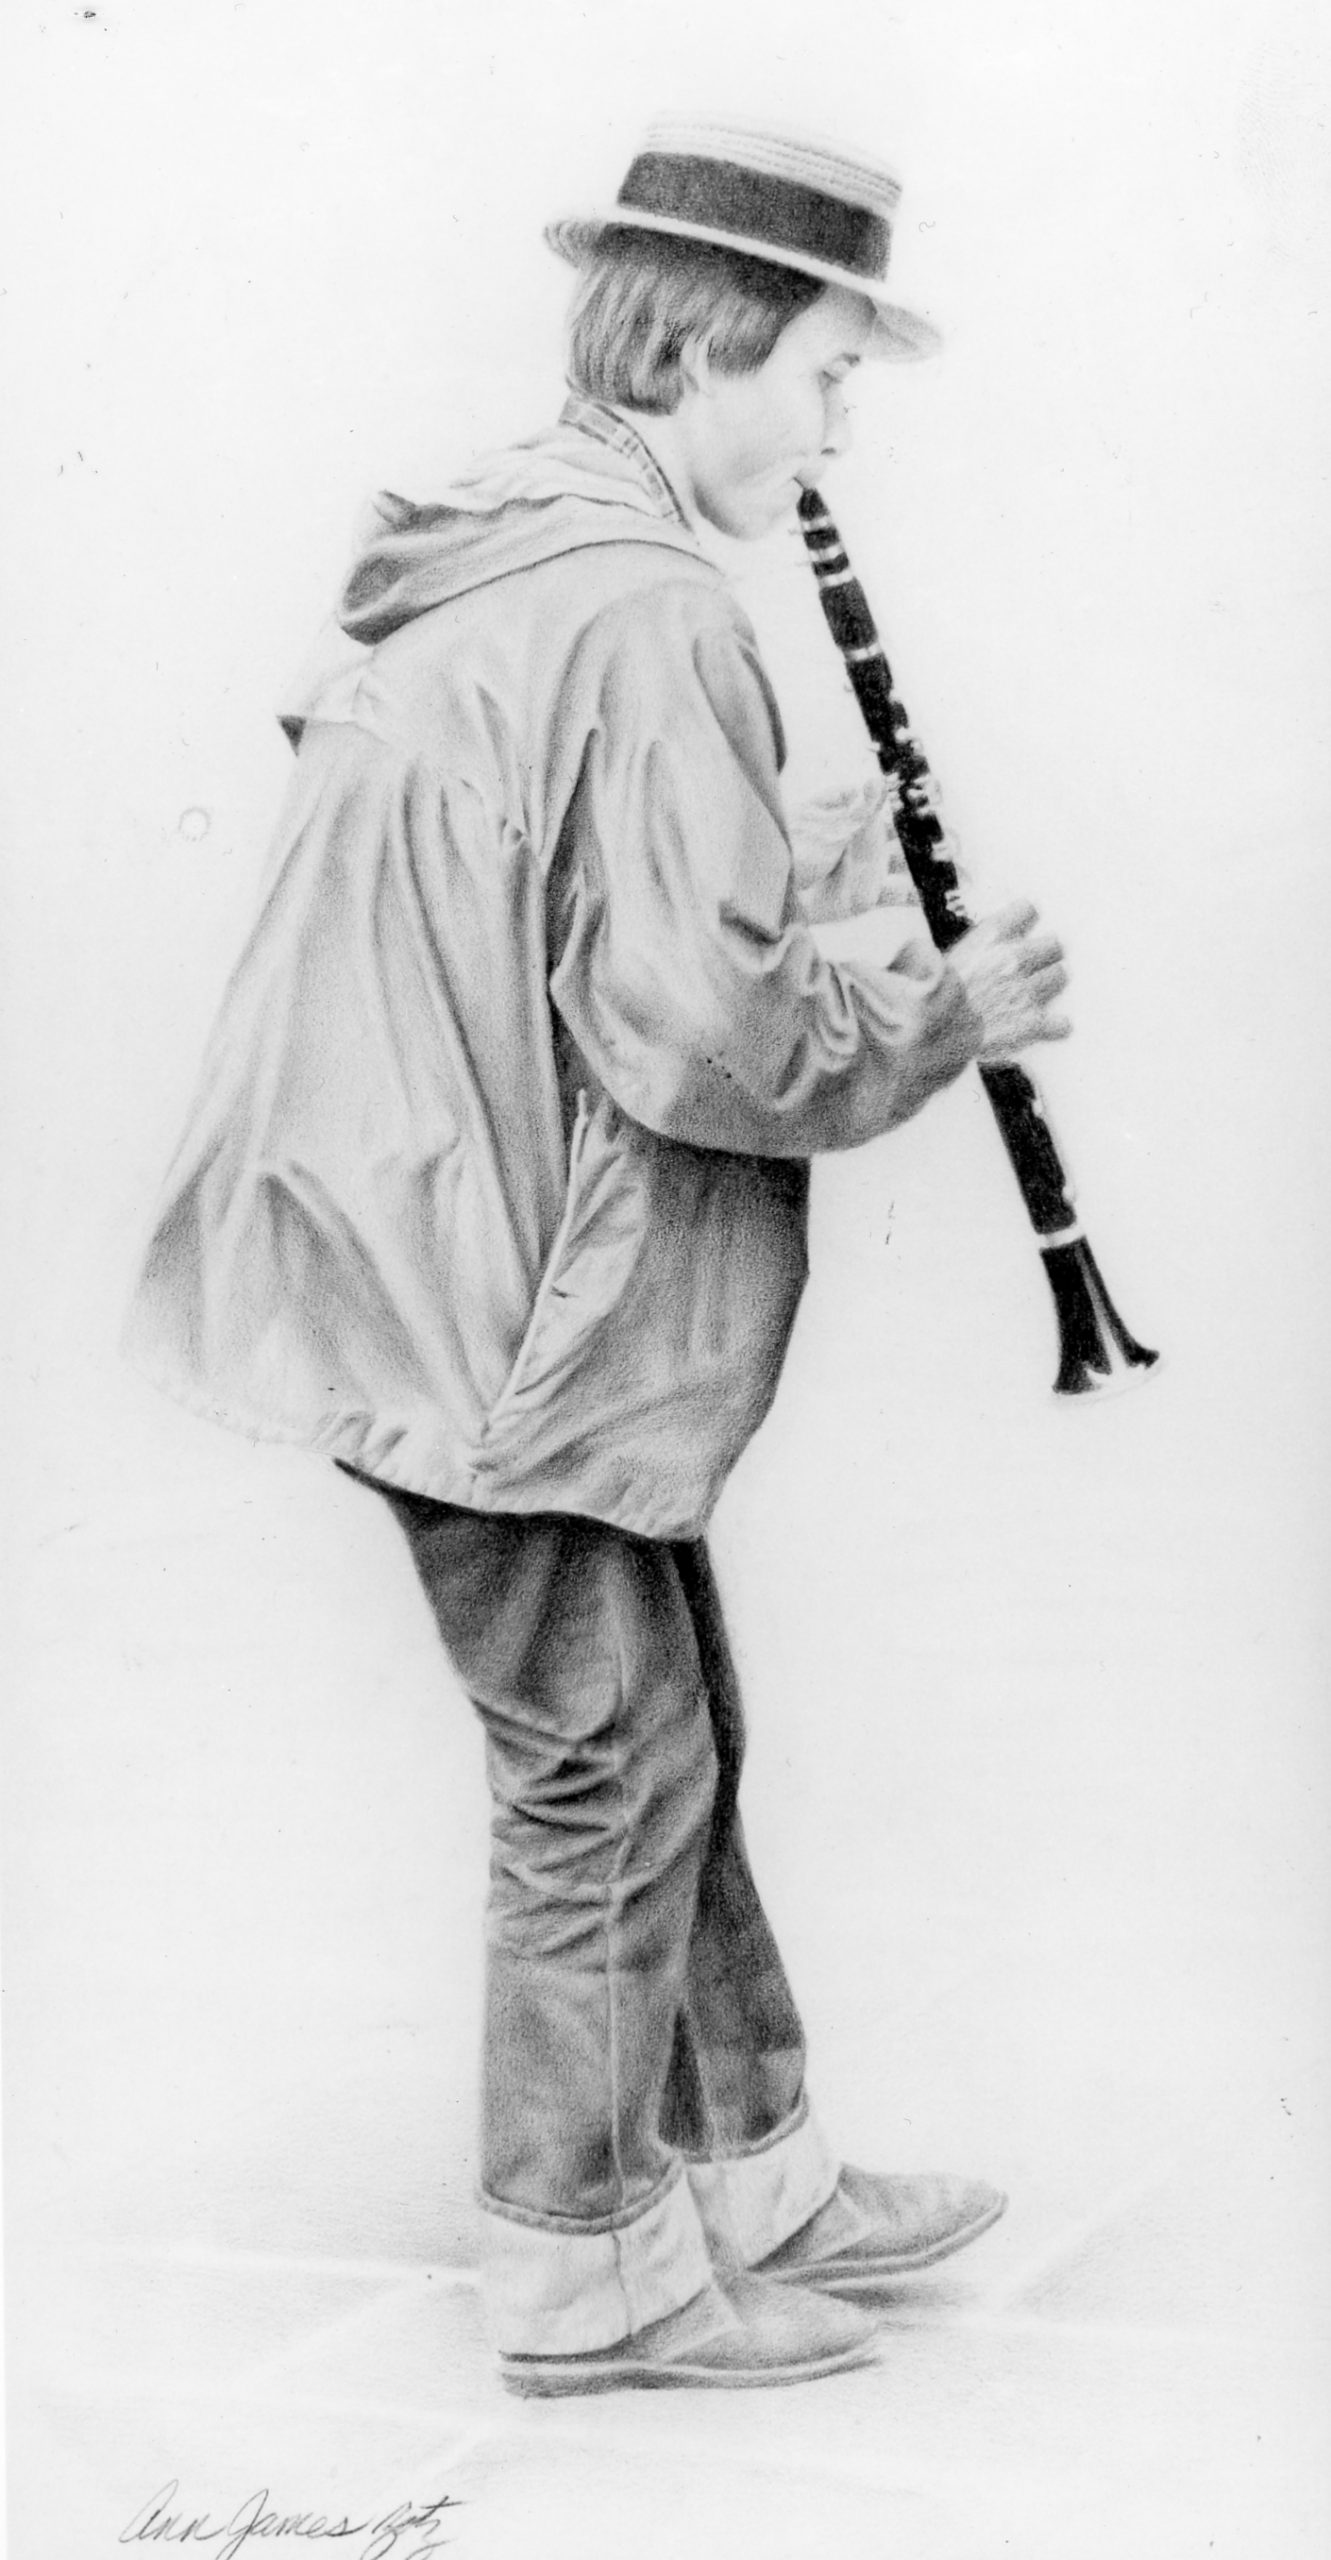 The Clarinetist © 1982 Ann James Massey
31.75in x 5.5in | 24.1cm x 14cm
Black Prismacolor wax pencil on paper
Collection of Lito and Ruth Bujanda-Moore